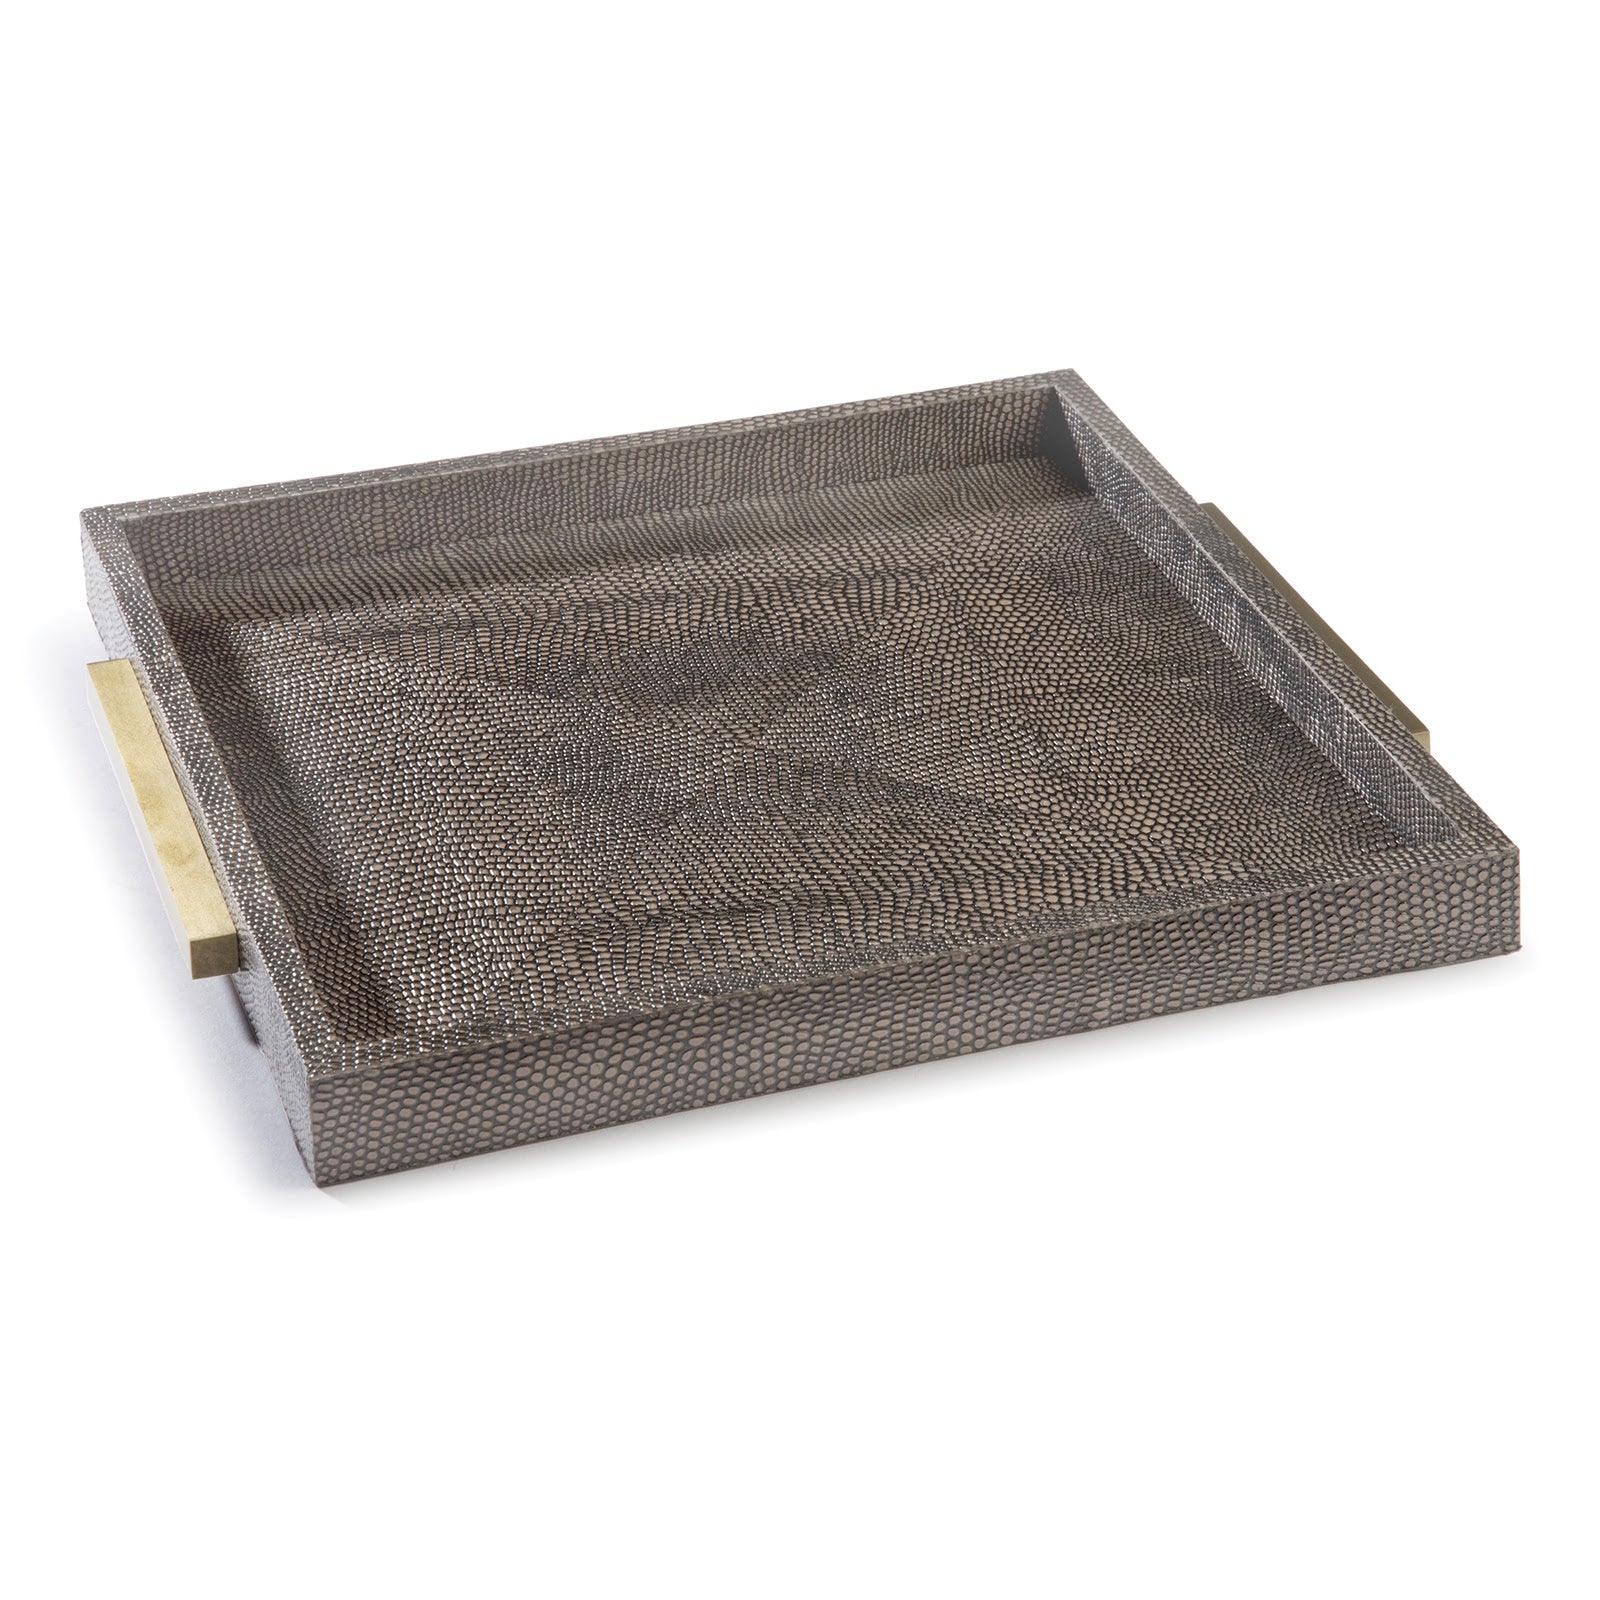 Square Shagreen Boutique Tray in Vintage Brown Snake by Regina Andrew